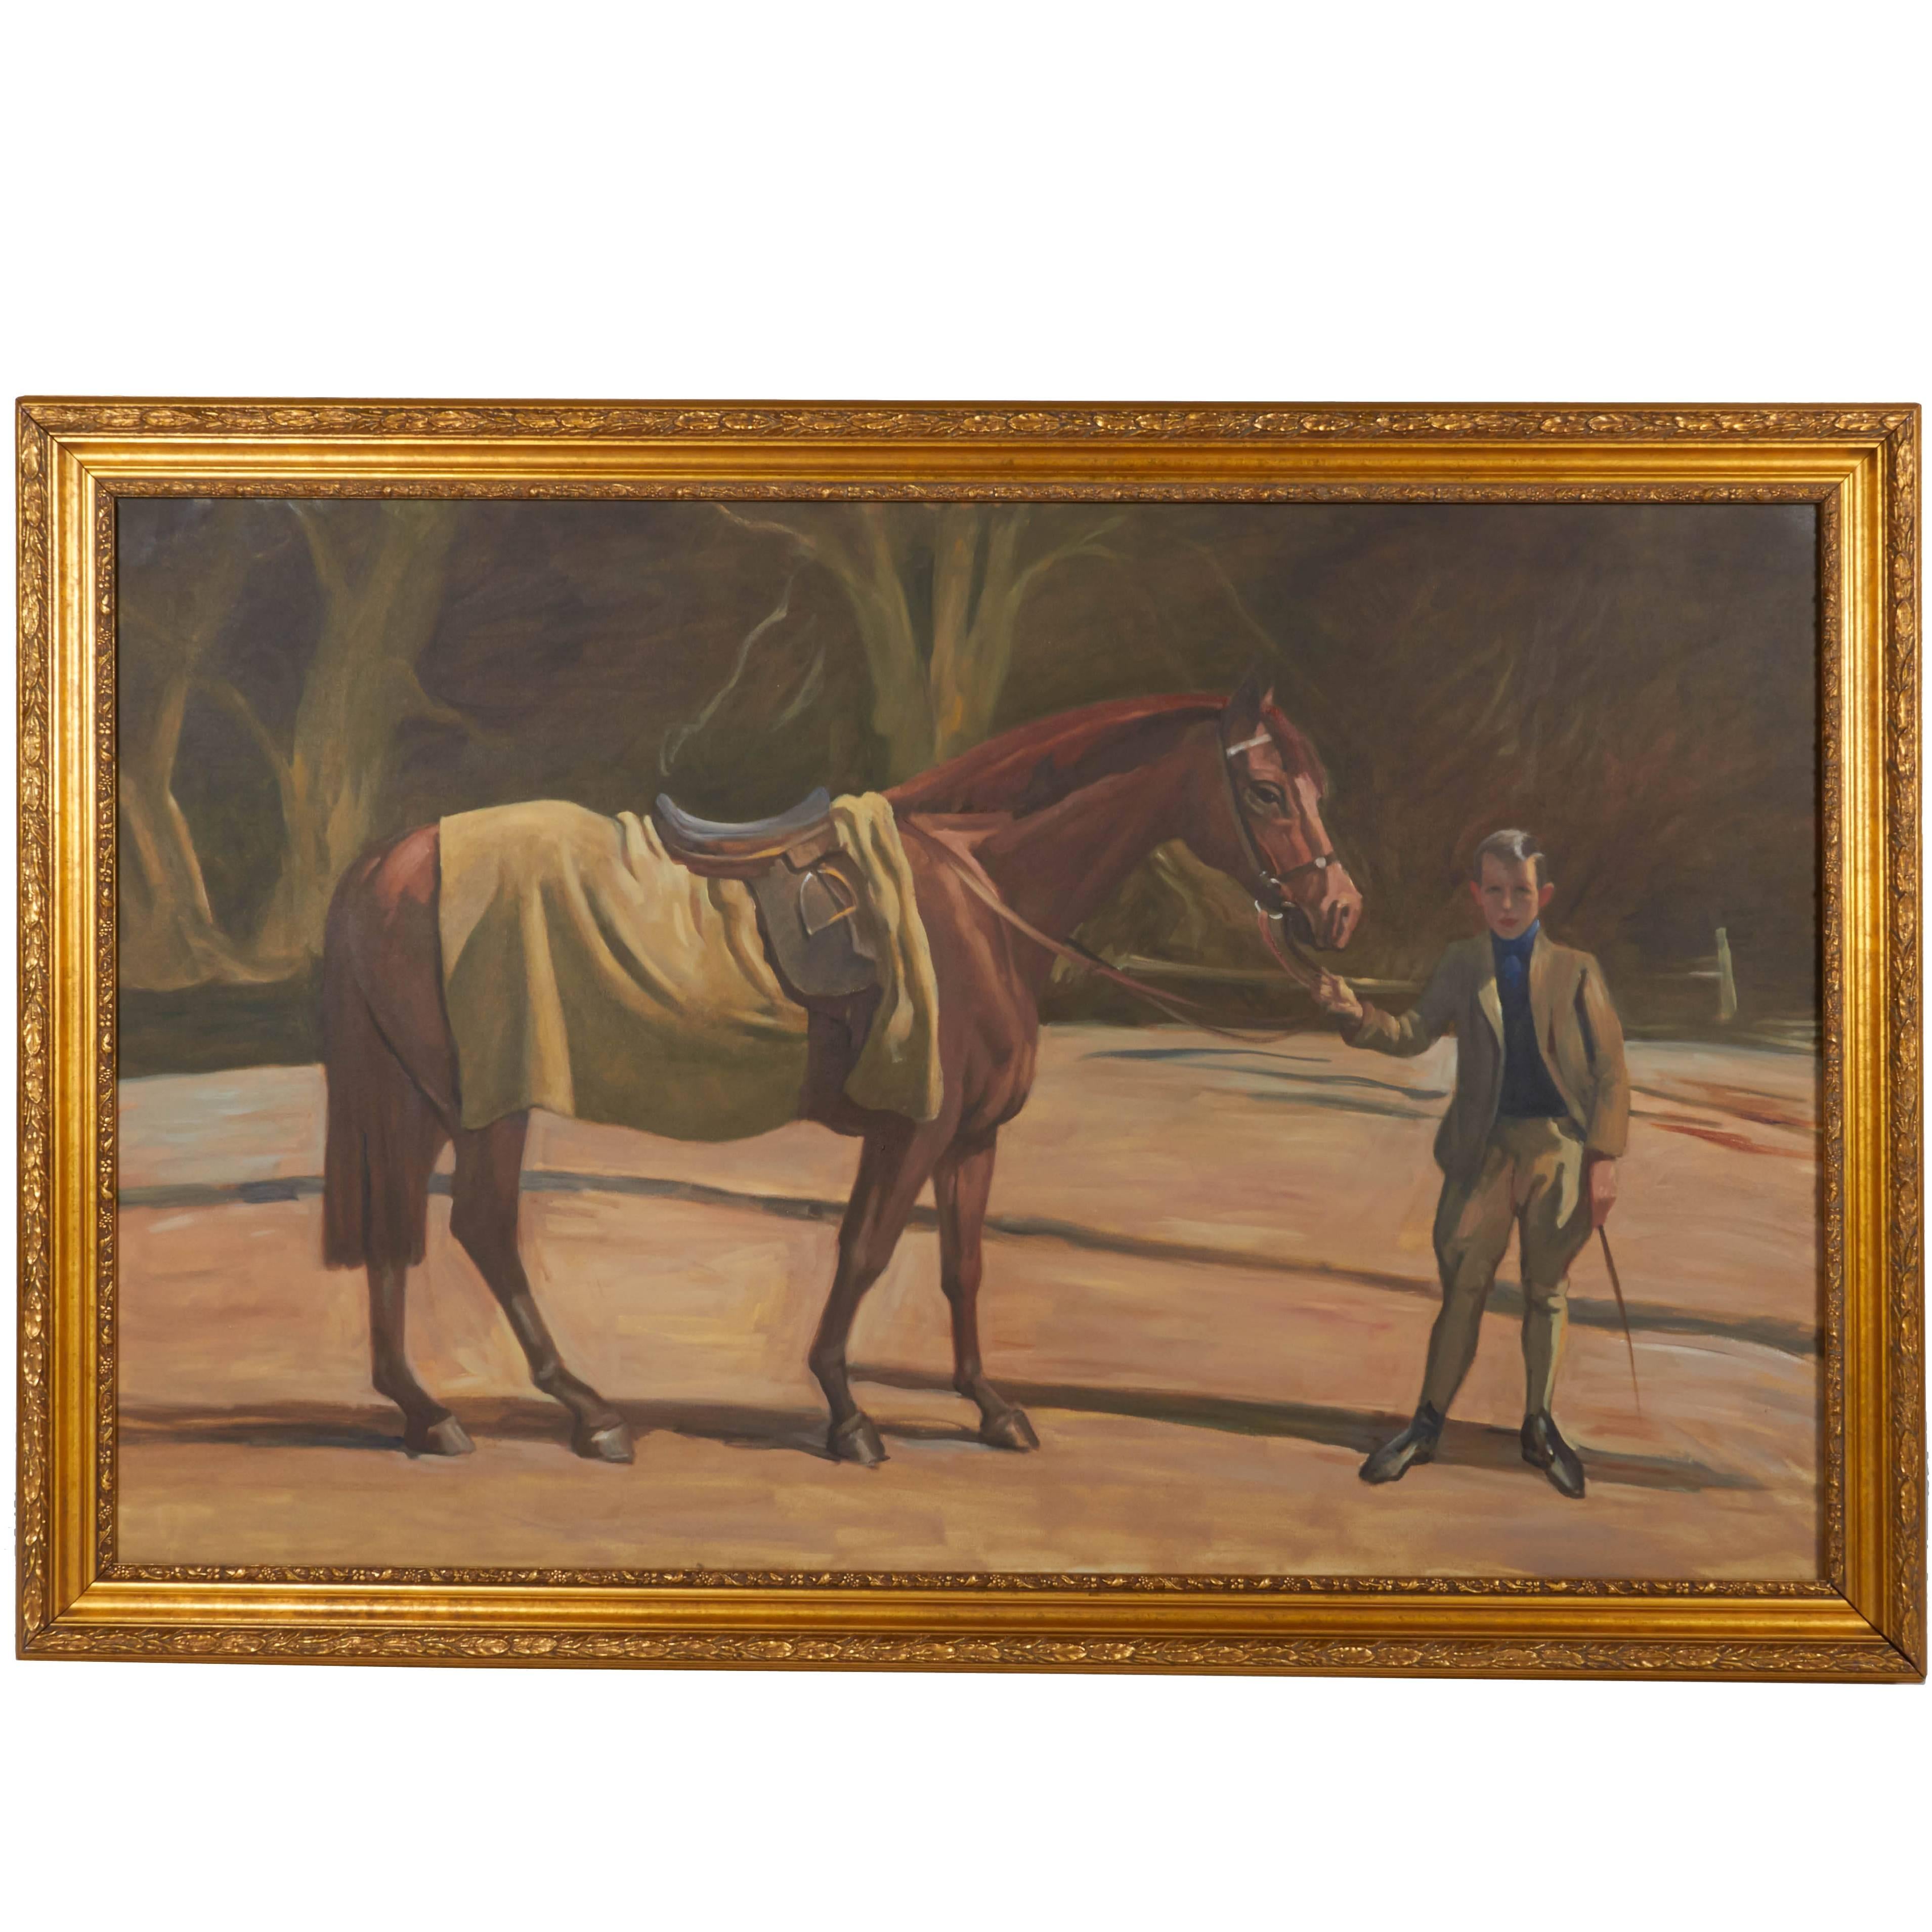 Oil on Canvas of Boy with Horse